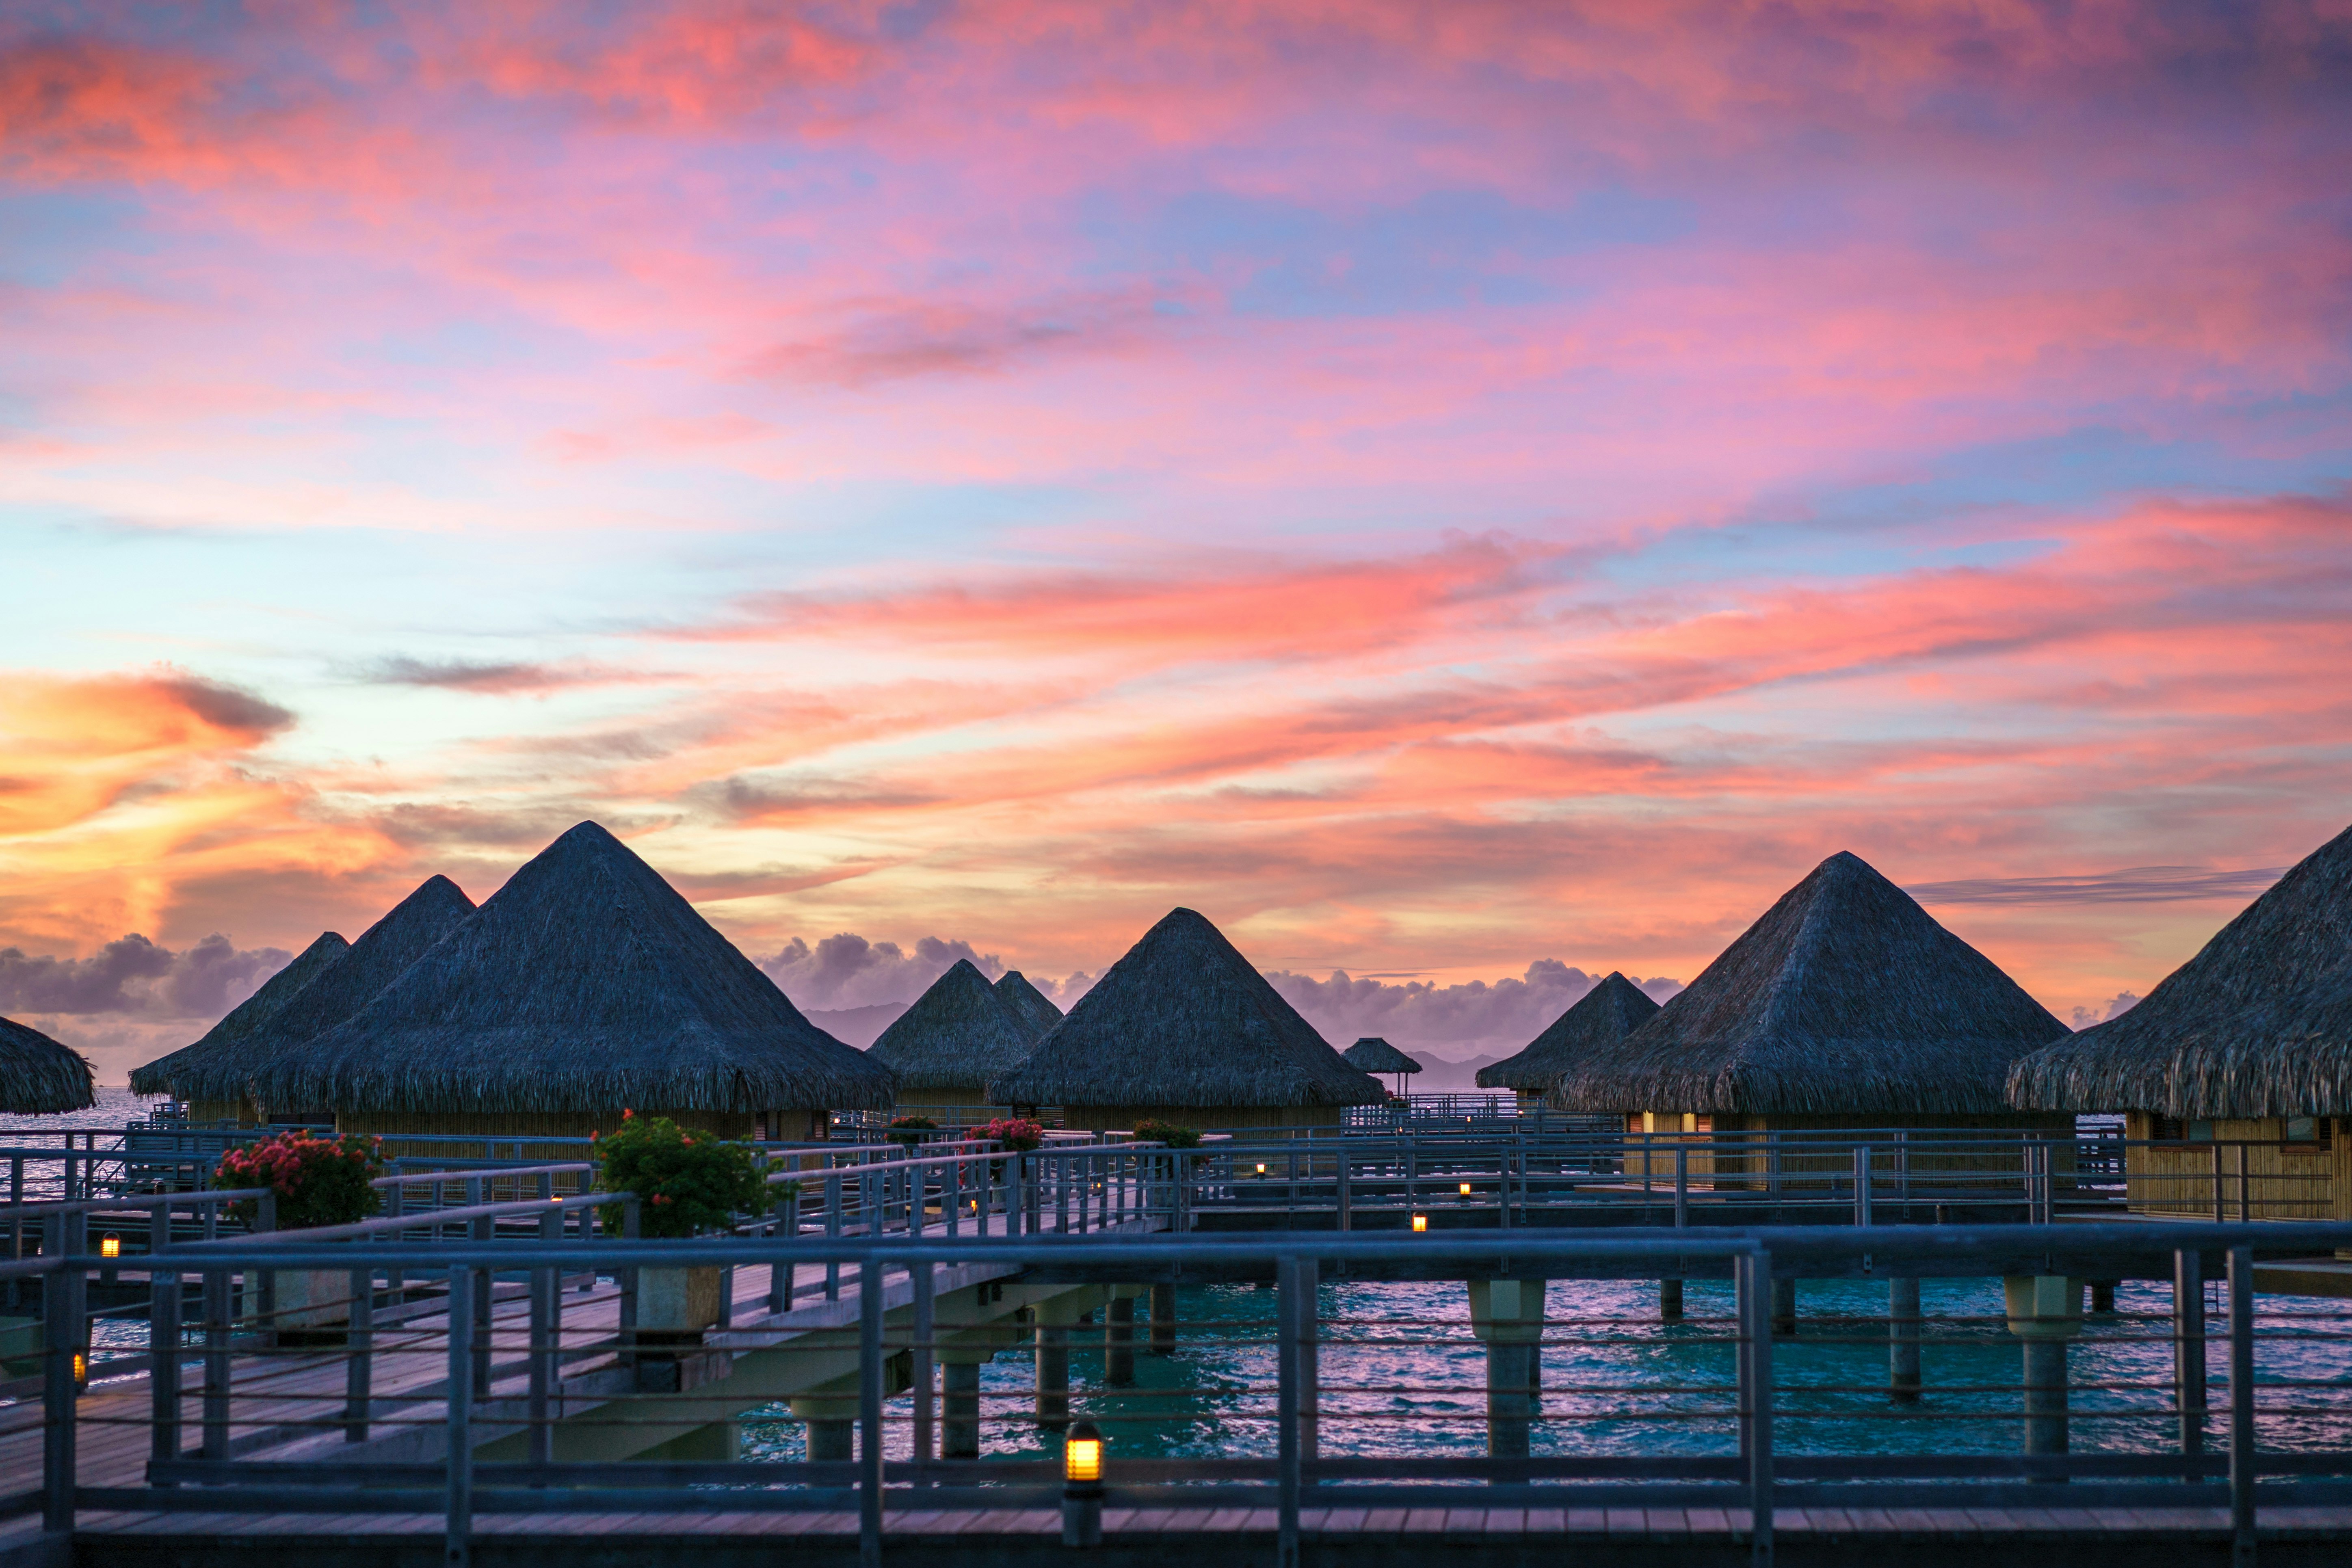 Overwater bungalow and colorful sky in Bora Bora